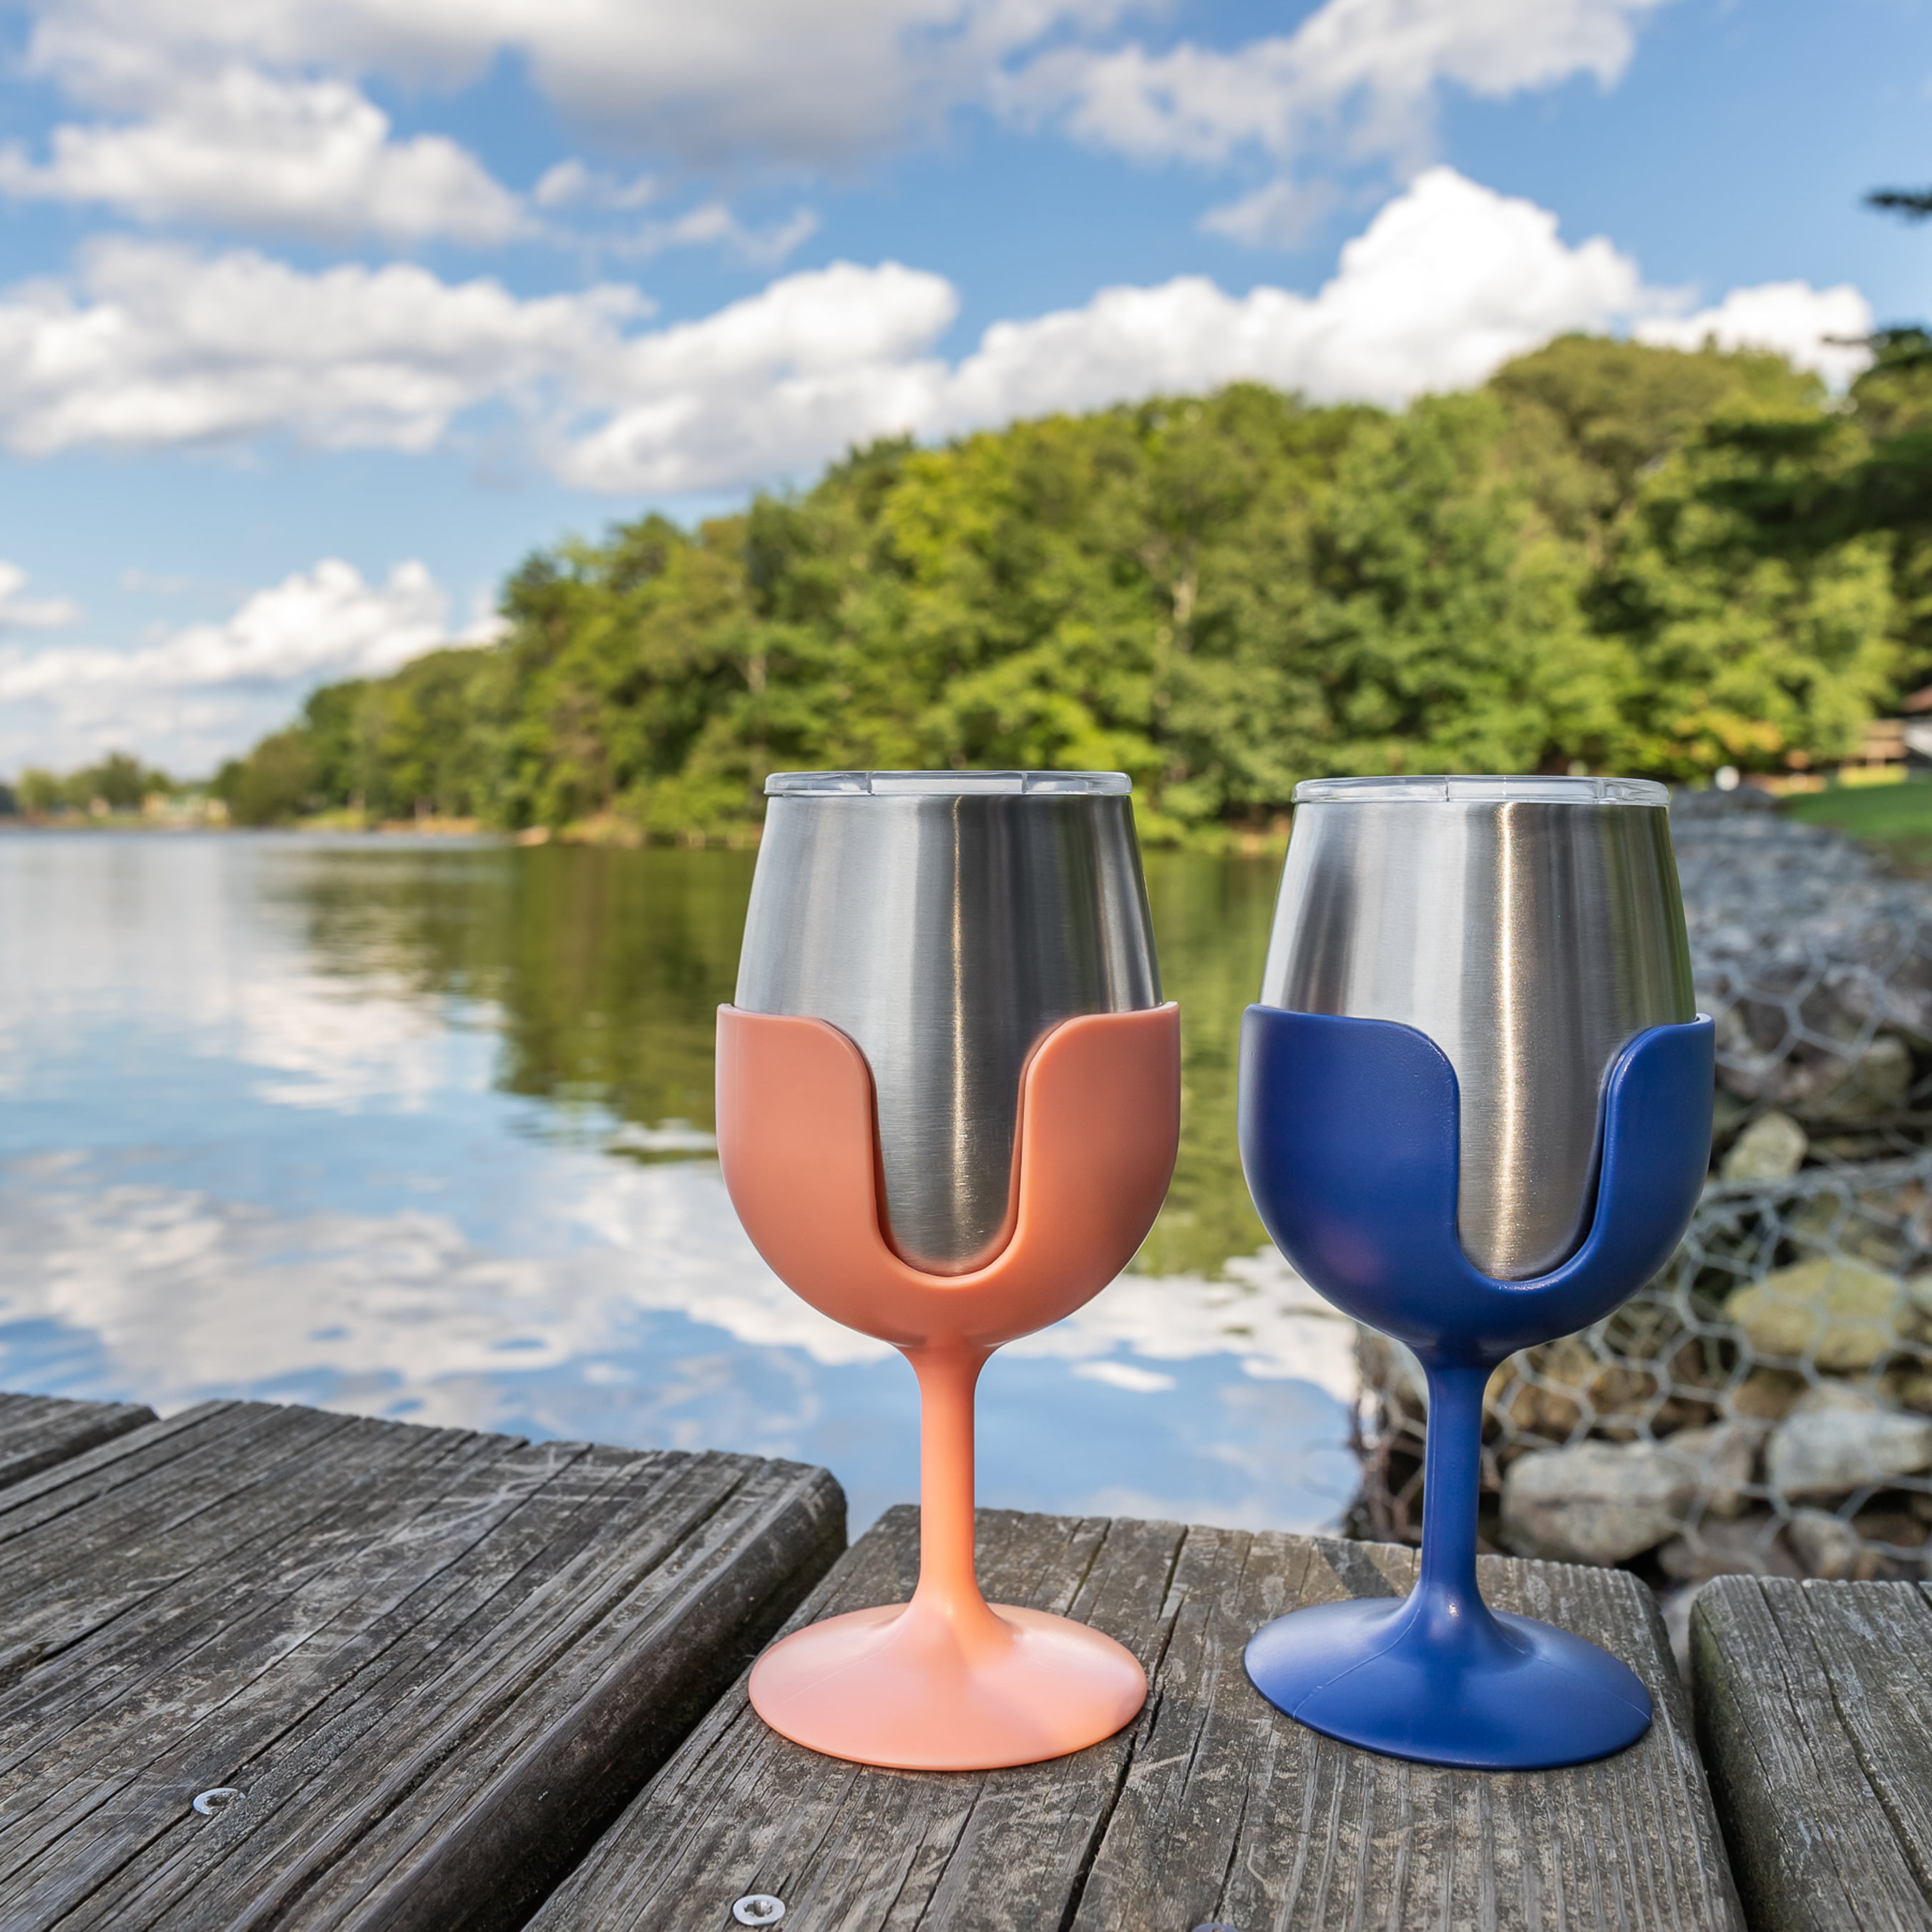 Camping Advice - Stemless Wine Tumbler – Elk County Laser